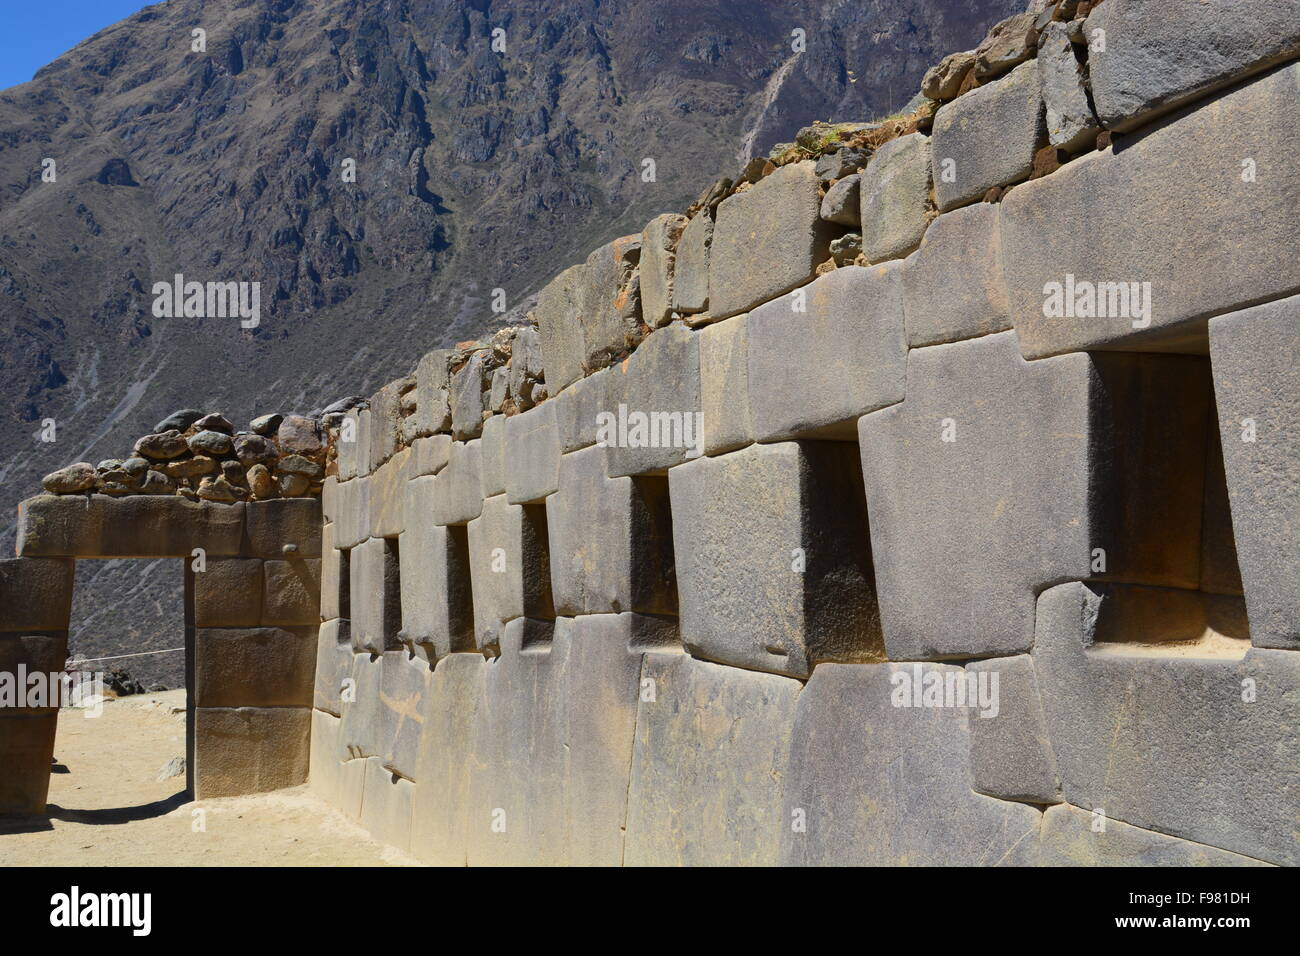 Wall with storage spaces and doorway at the Inca ruin of Ollantaytambo in the Sacred Valley of Peru. Stock Photo